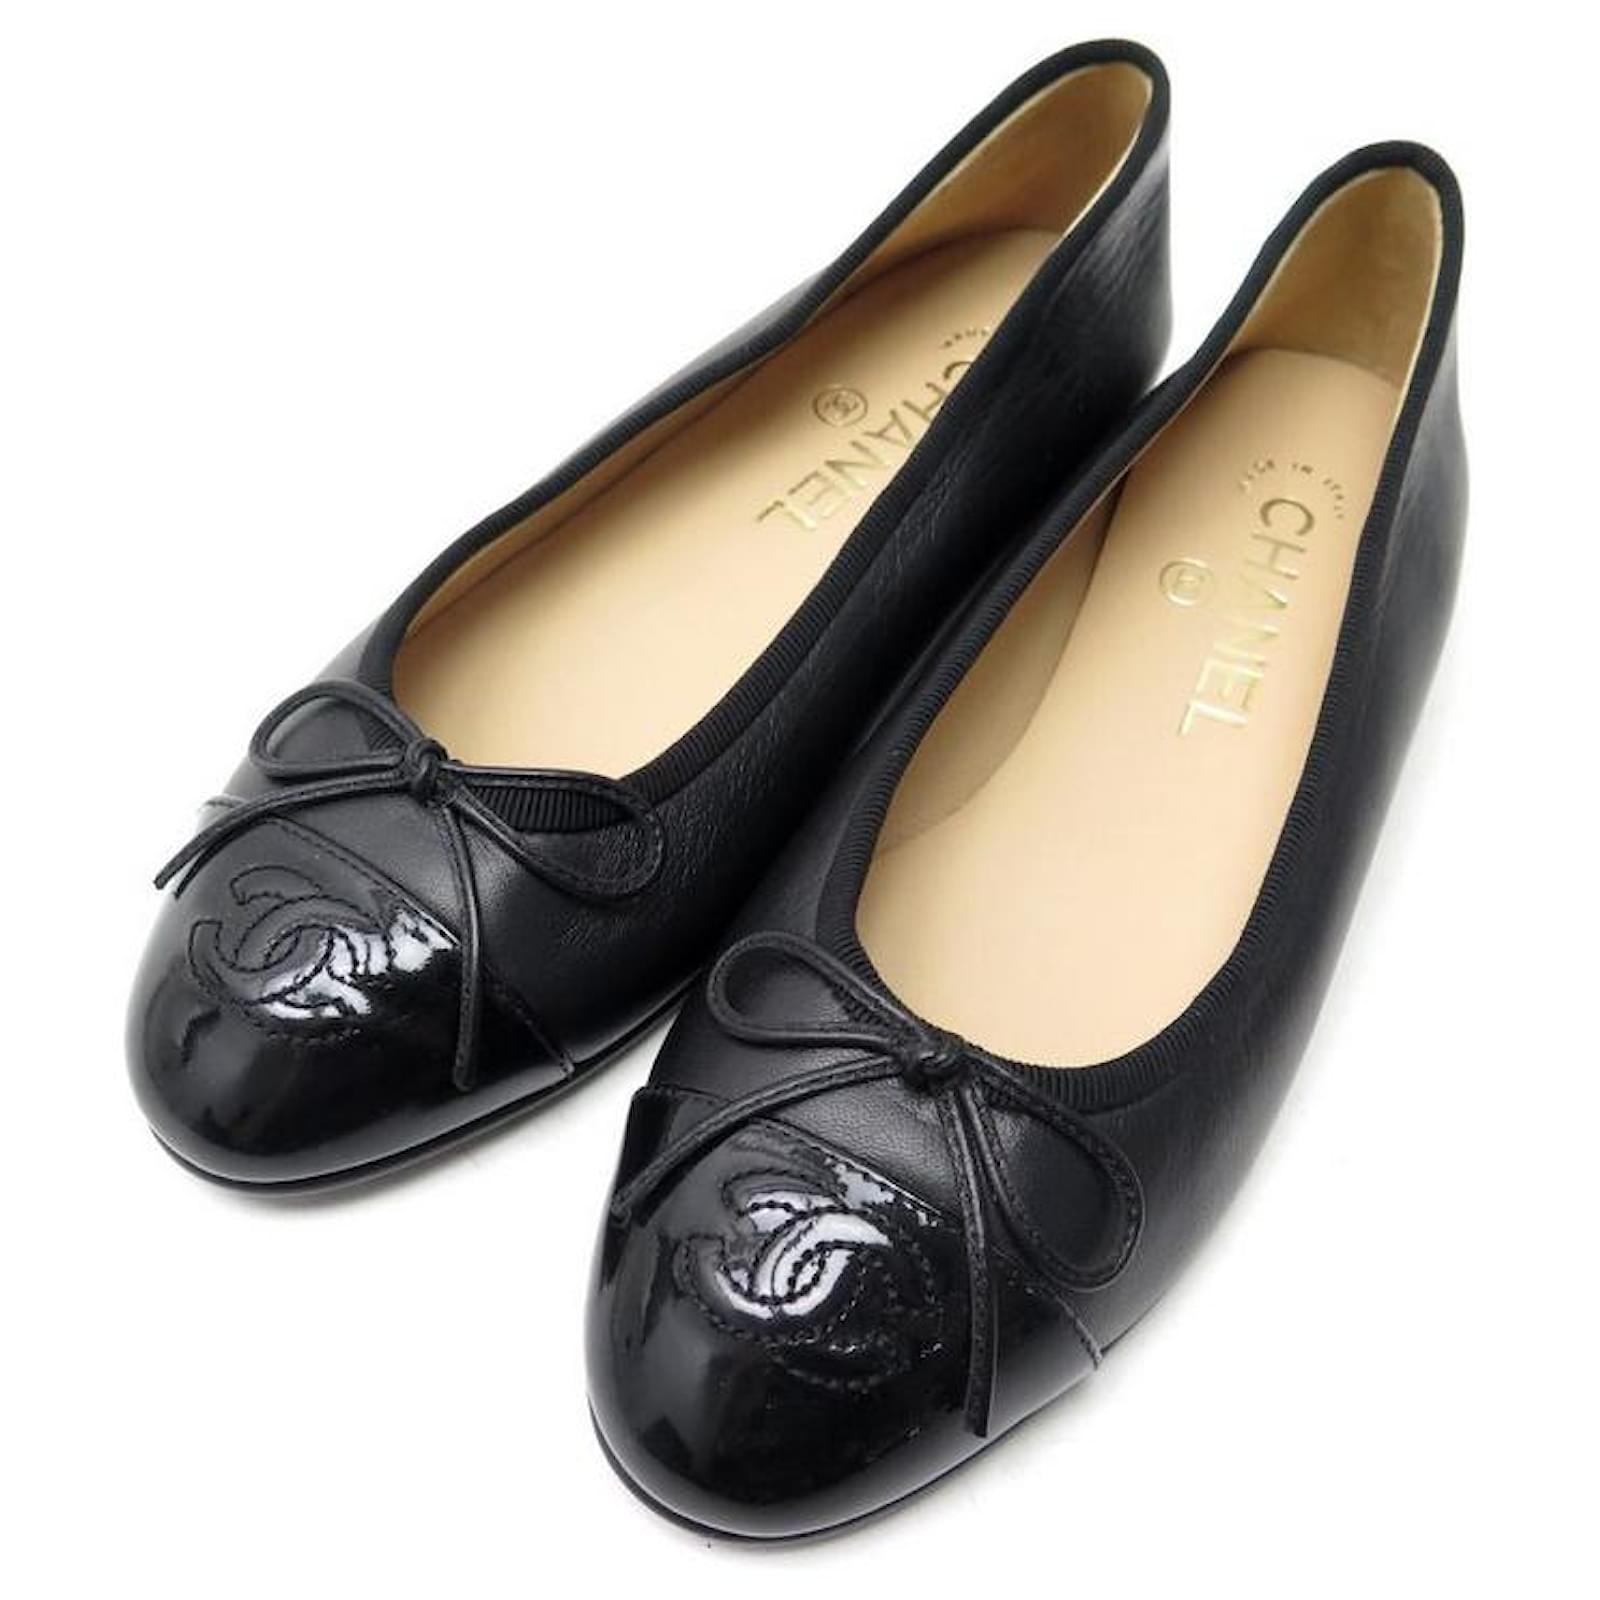 Chanel Black and Gold Shoes with Rose Bud Embellishment — Elizabeth DeWitt  Upscale Resale